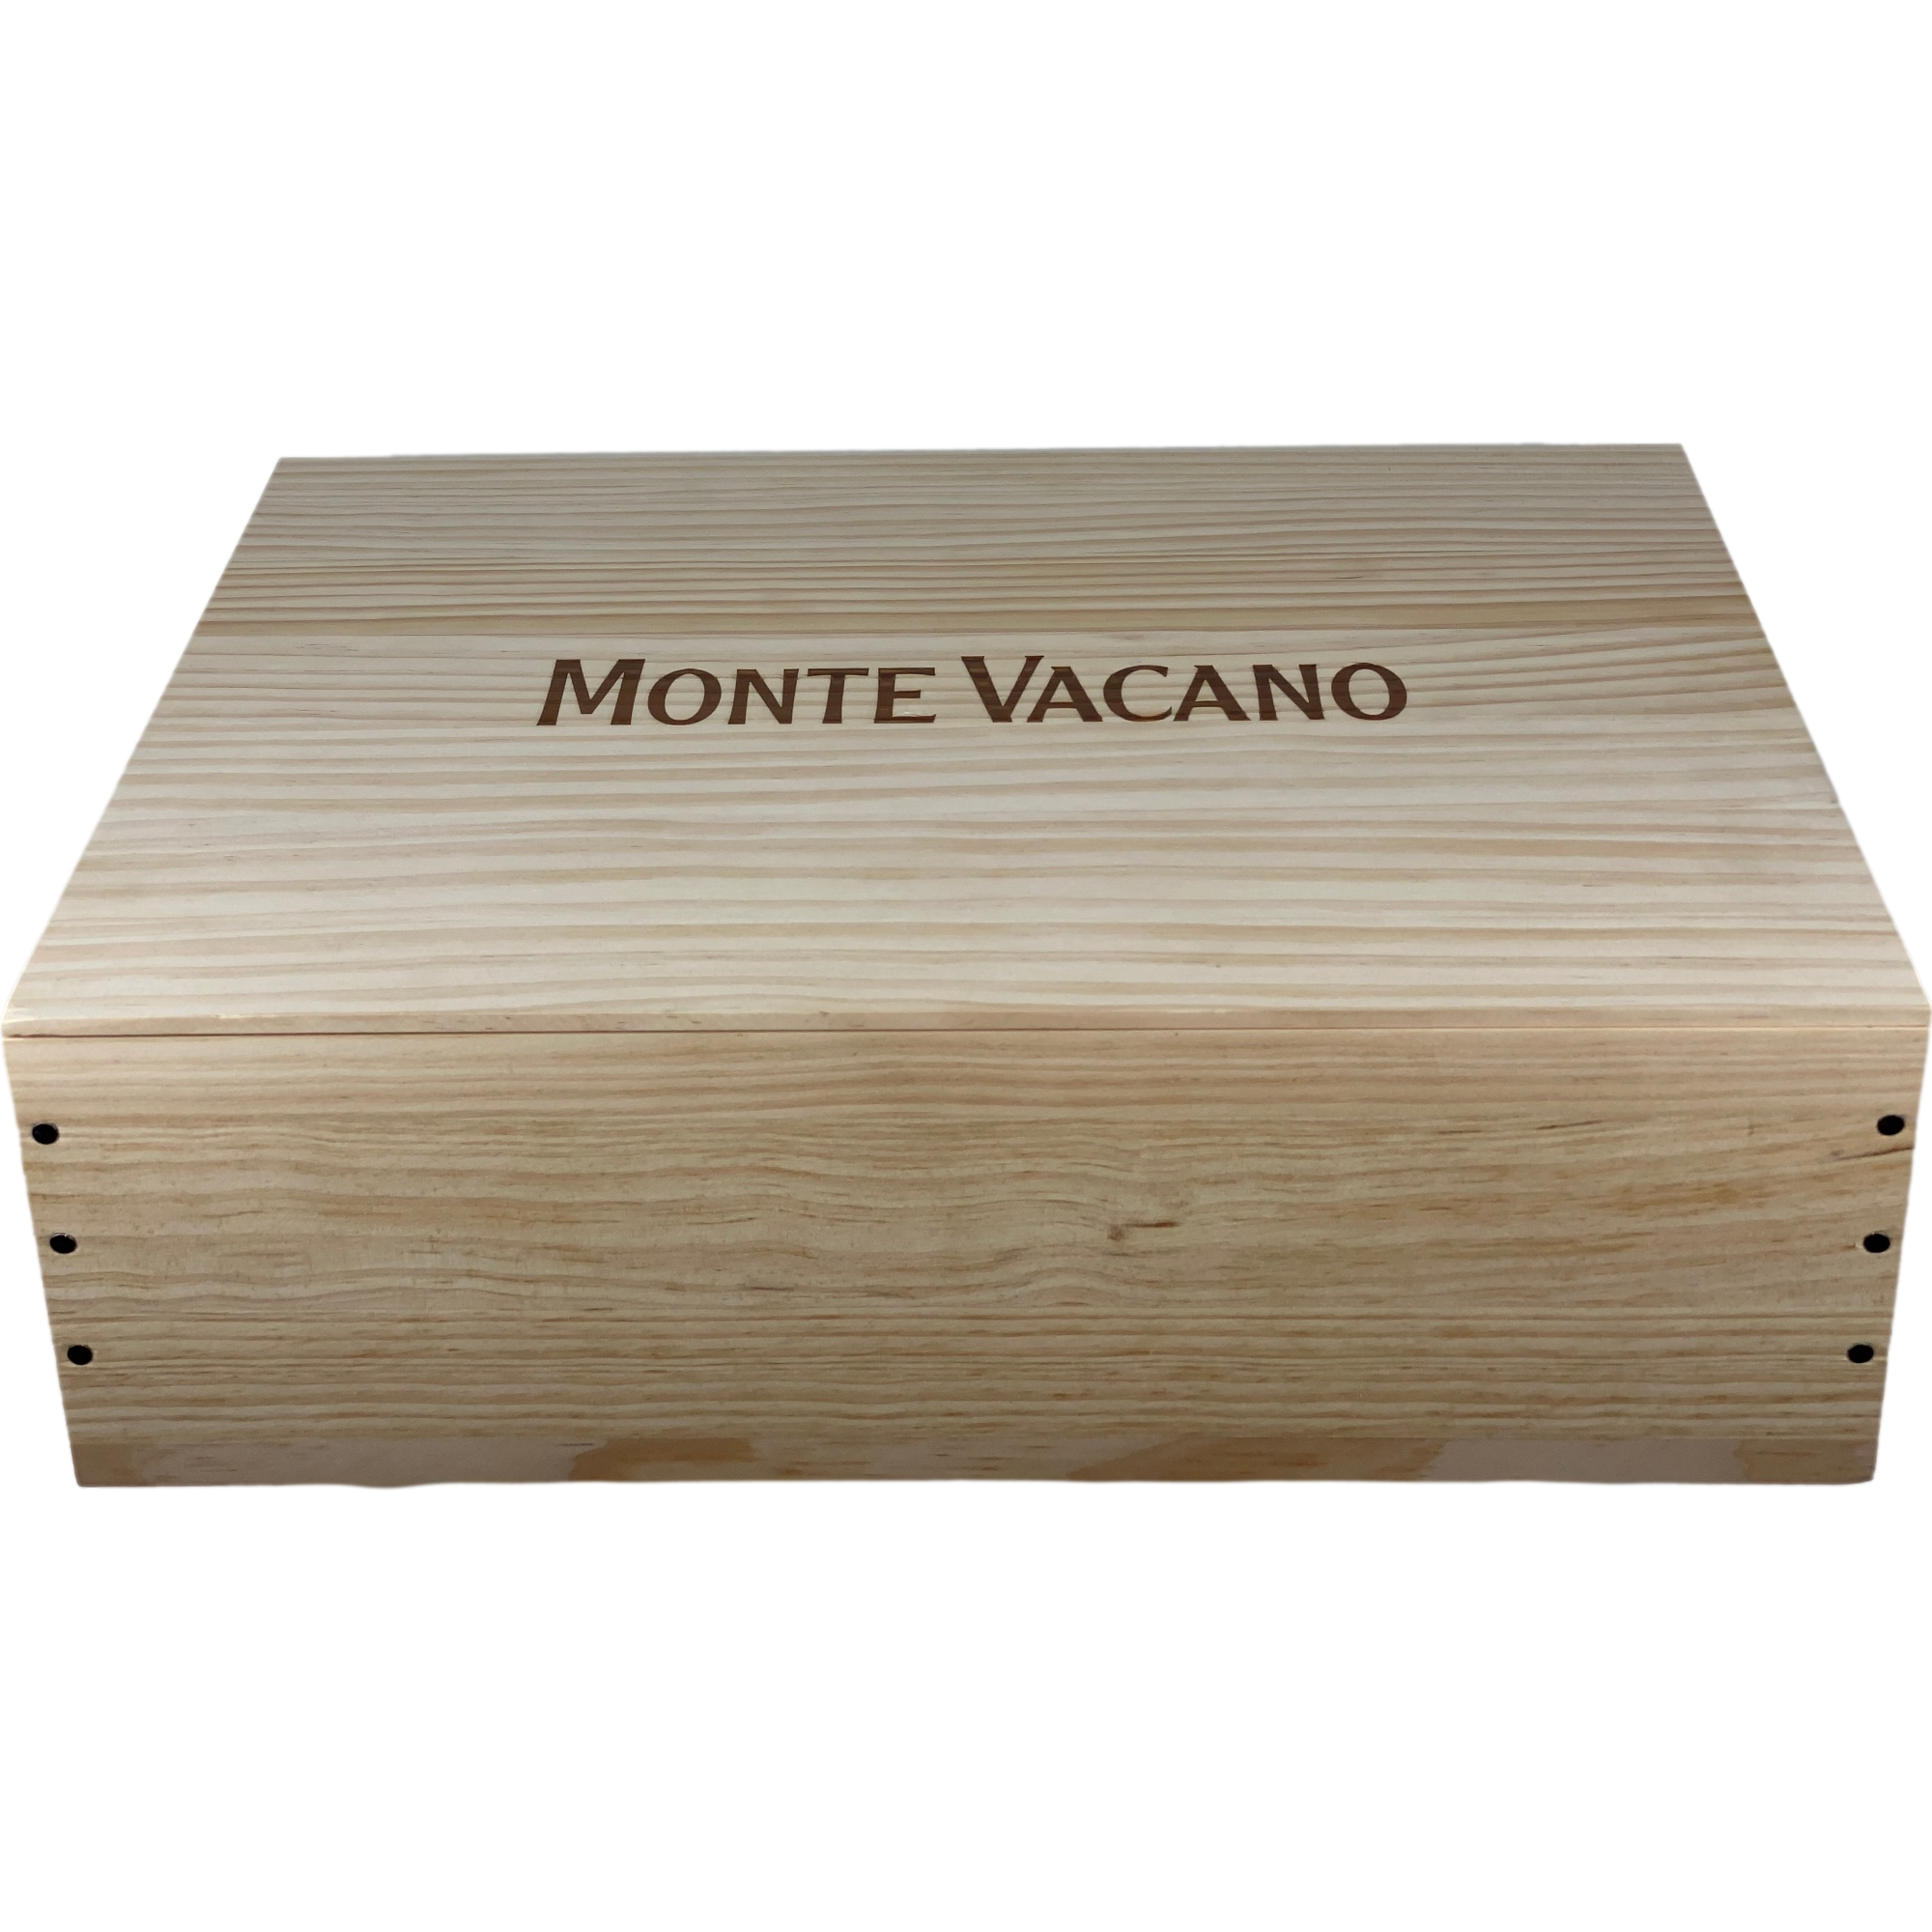 Robert Weil - Monte Vacano Riesling    2019  - 3*0,75l OWC